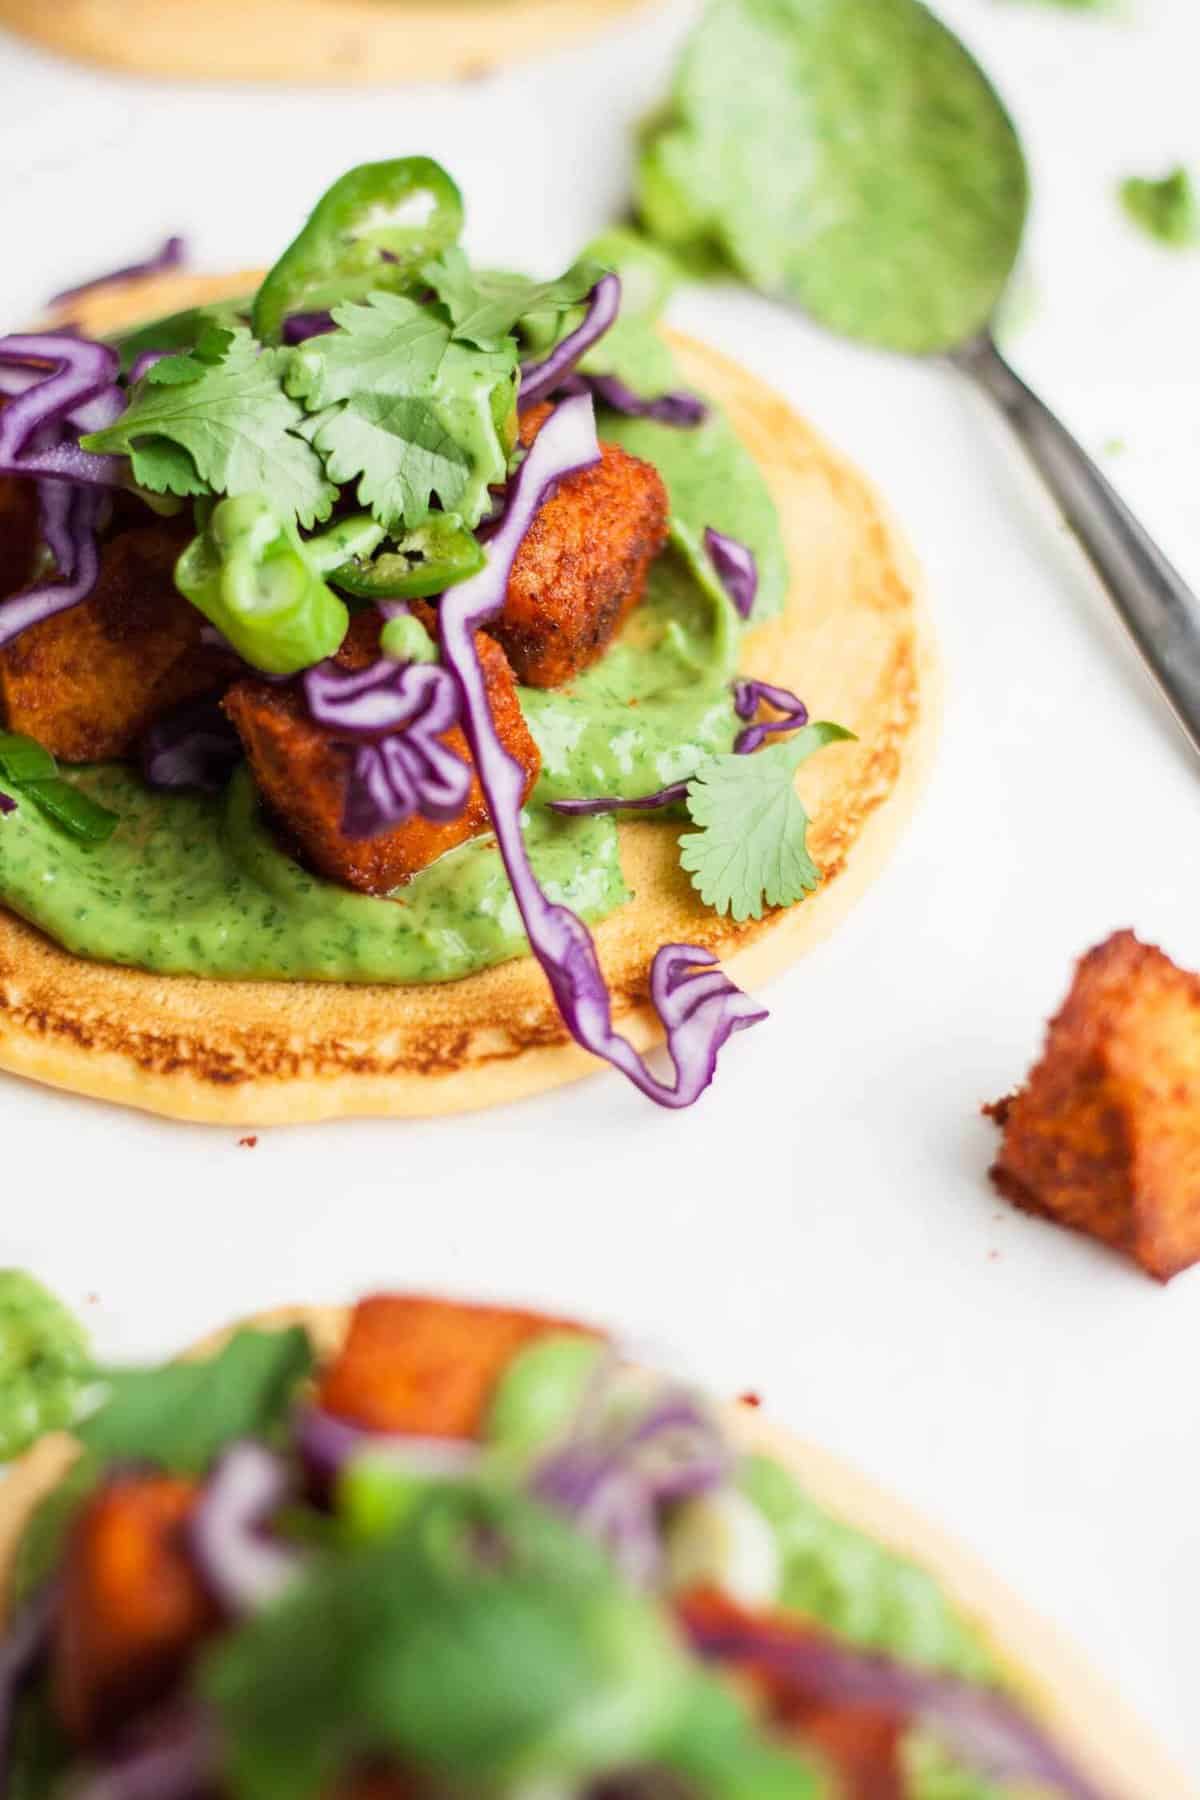 A socca pizza with sweet potato cabbage and avocado spread.